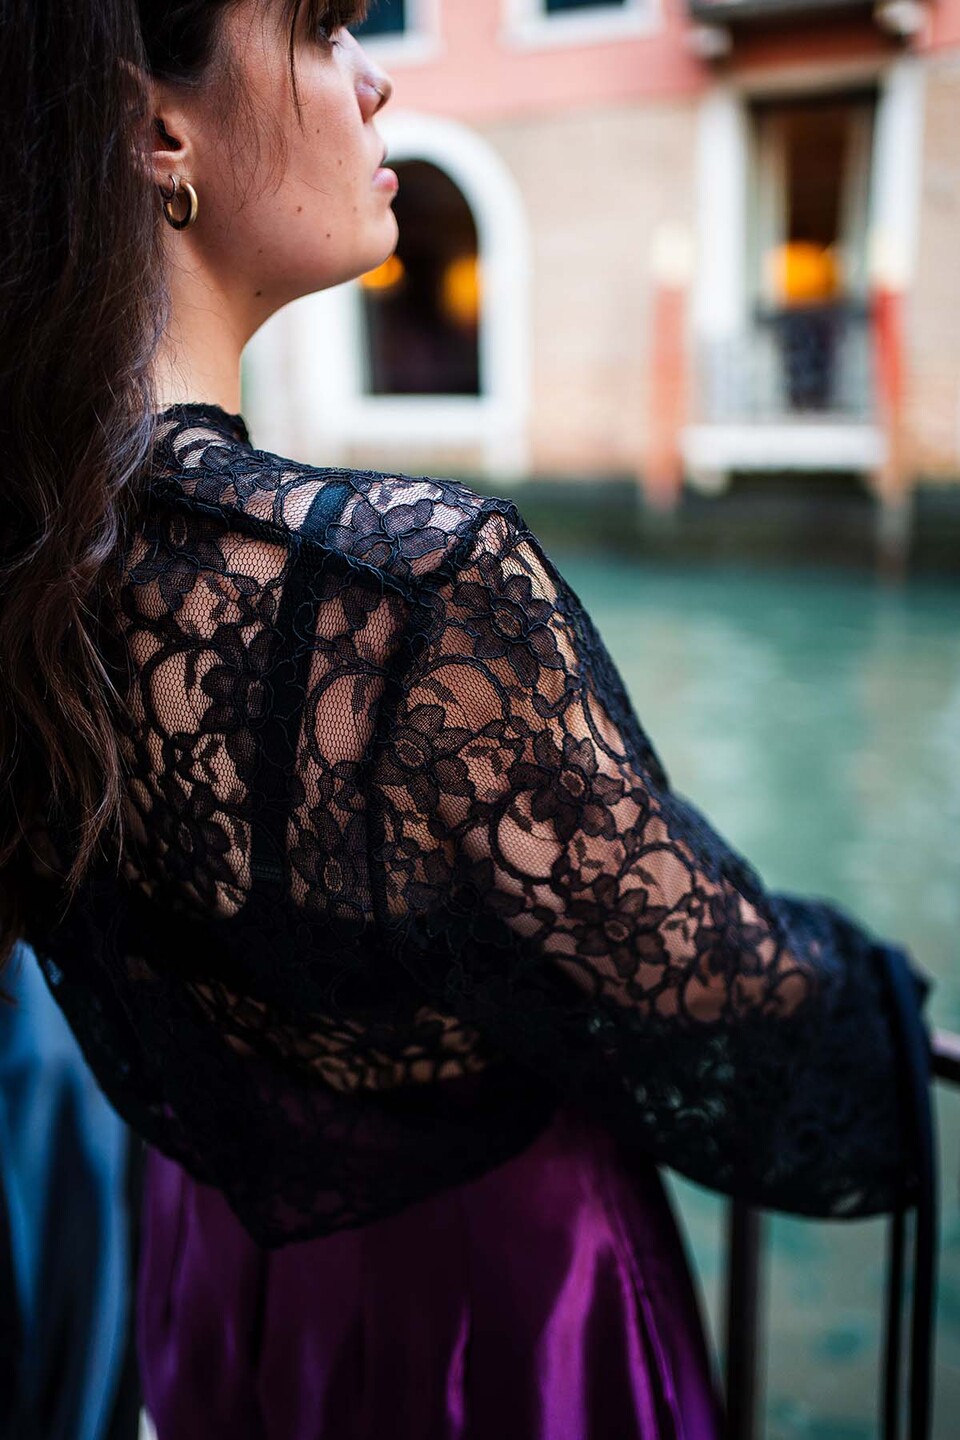 Close up of shoulder and sleeve of a top worn by a woman modelling Flamenco inspired streetwear from a collection by Paula Pacheco by a canal in Seville